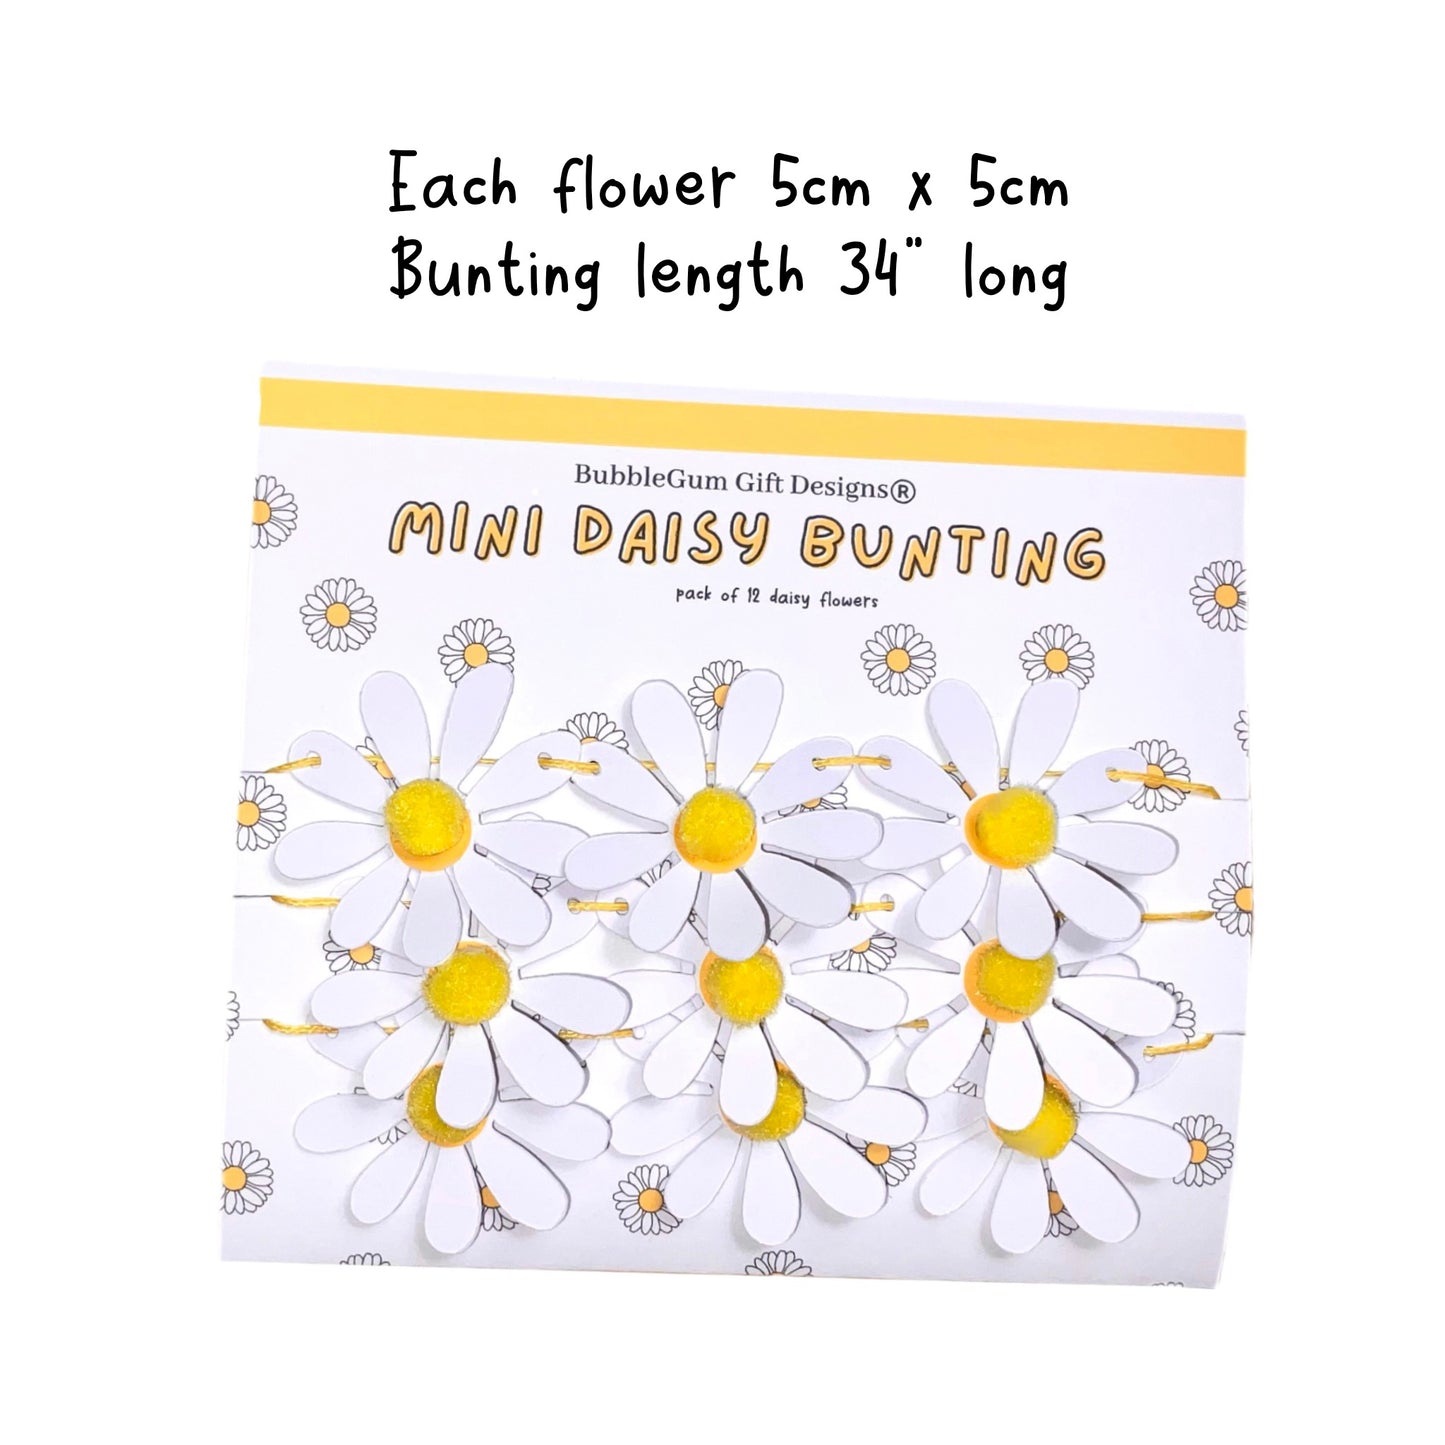 Daisy flower mini bunting Spring flowers yellow Pom Pom centres Daisy Garland floral accessories Easter bloom Daisy decor